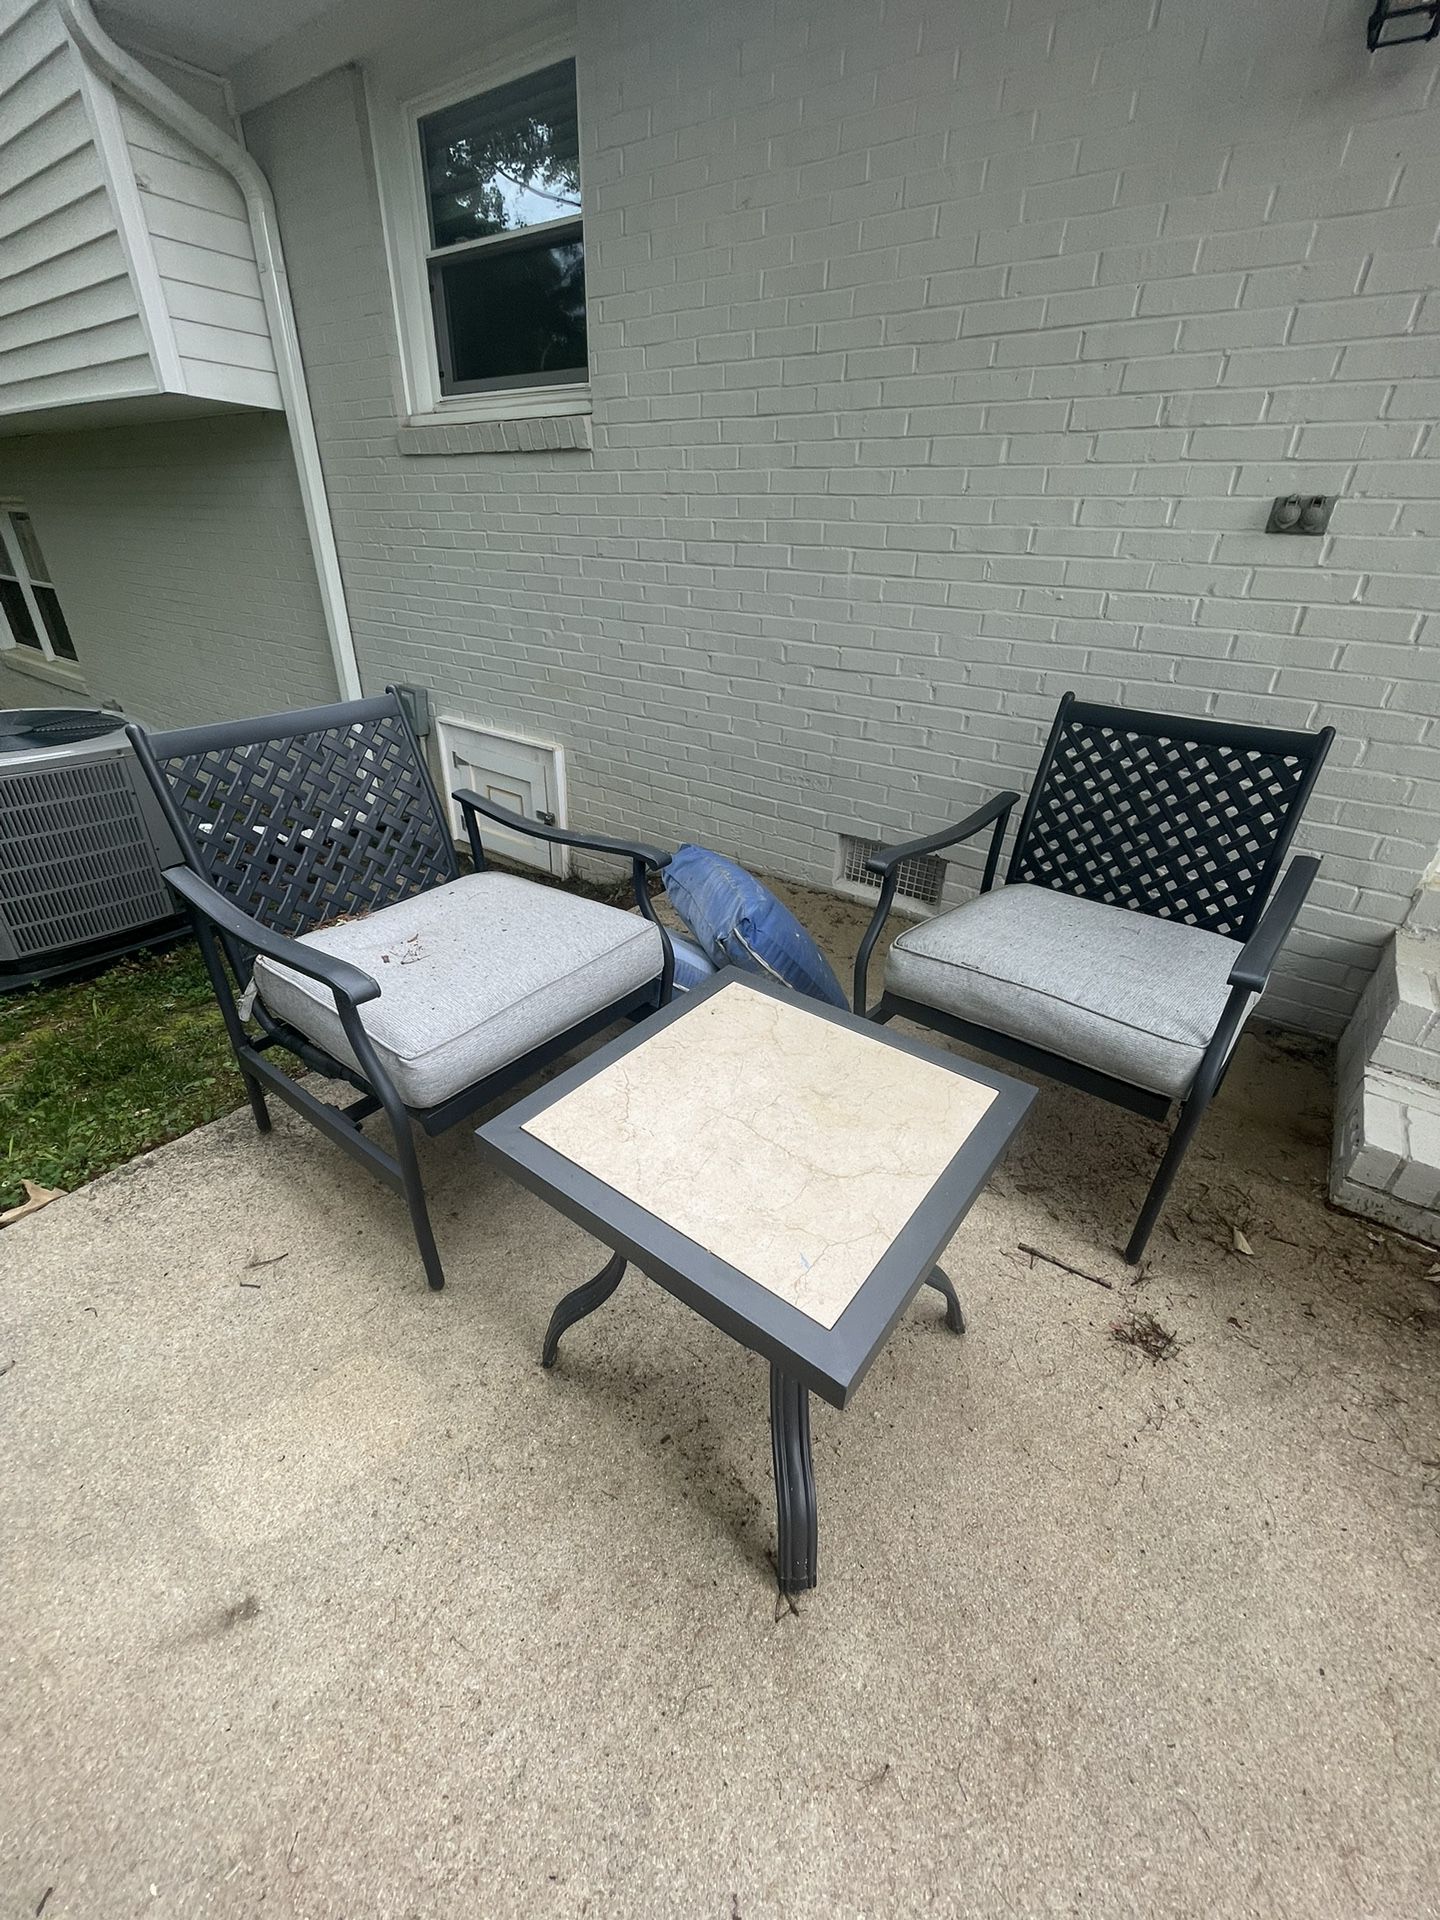 Outdoor Chairs And Table